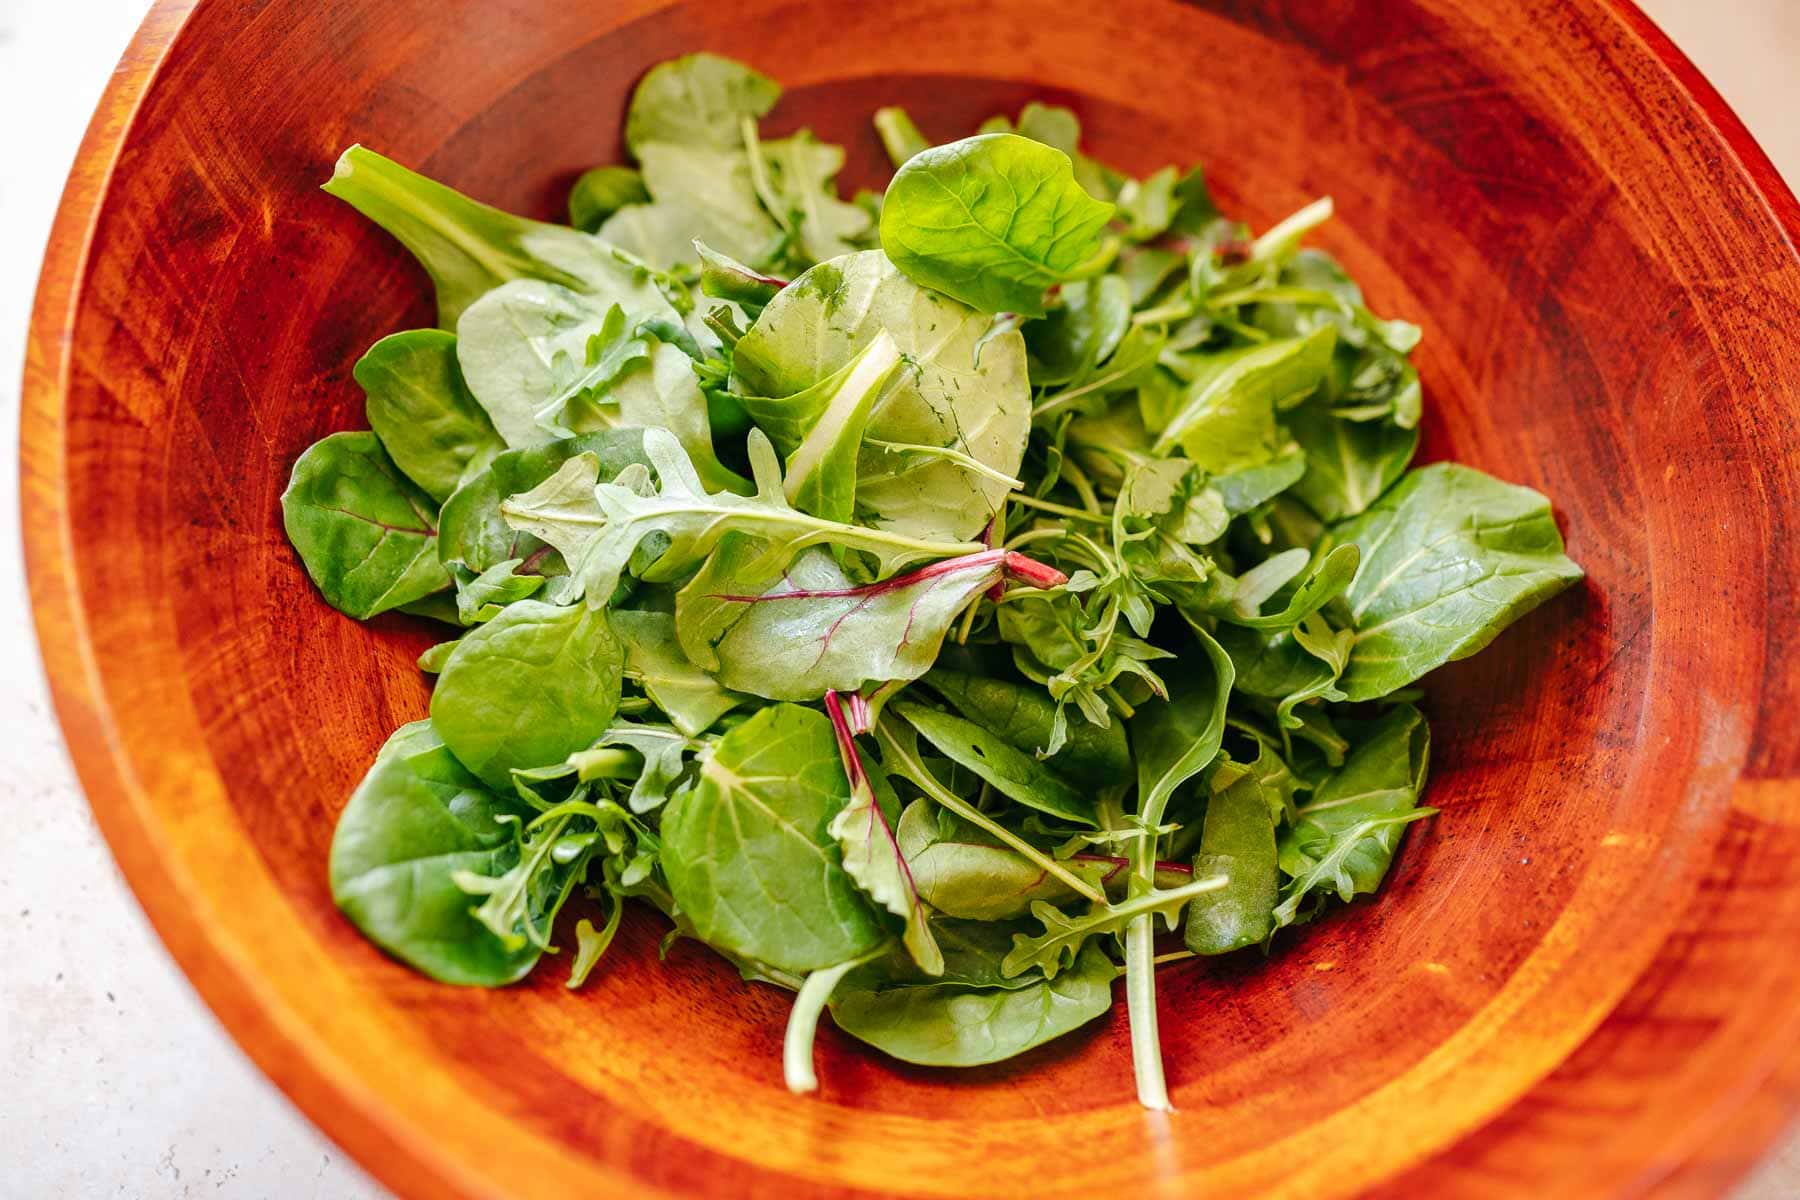 A wood salad bowl filled with fresh salad greens.